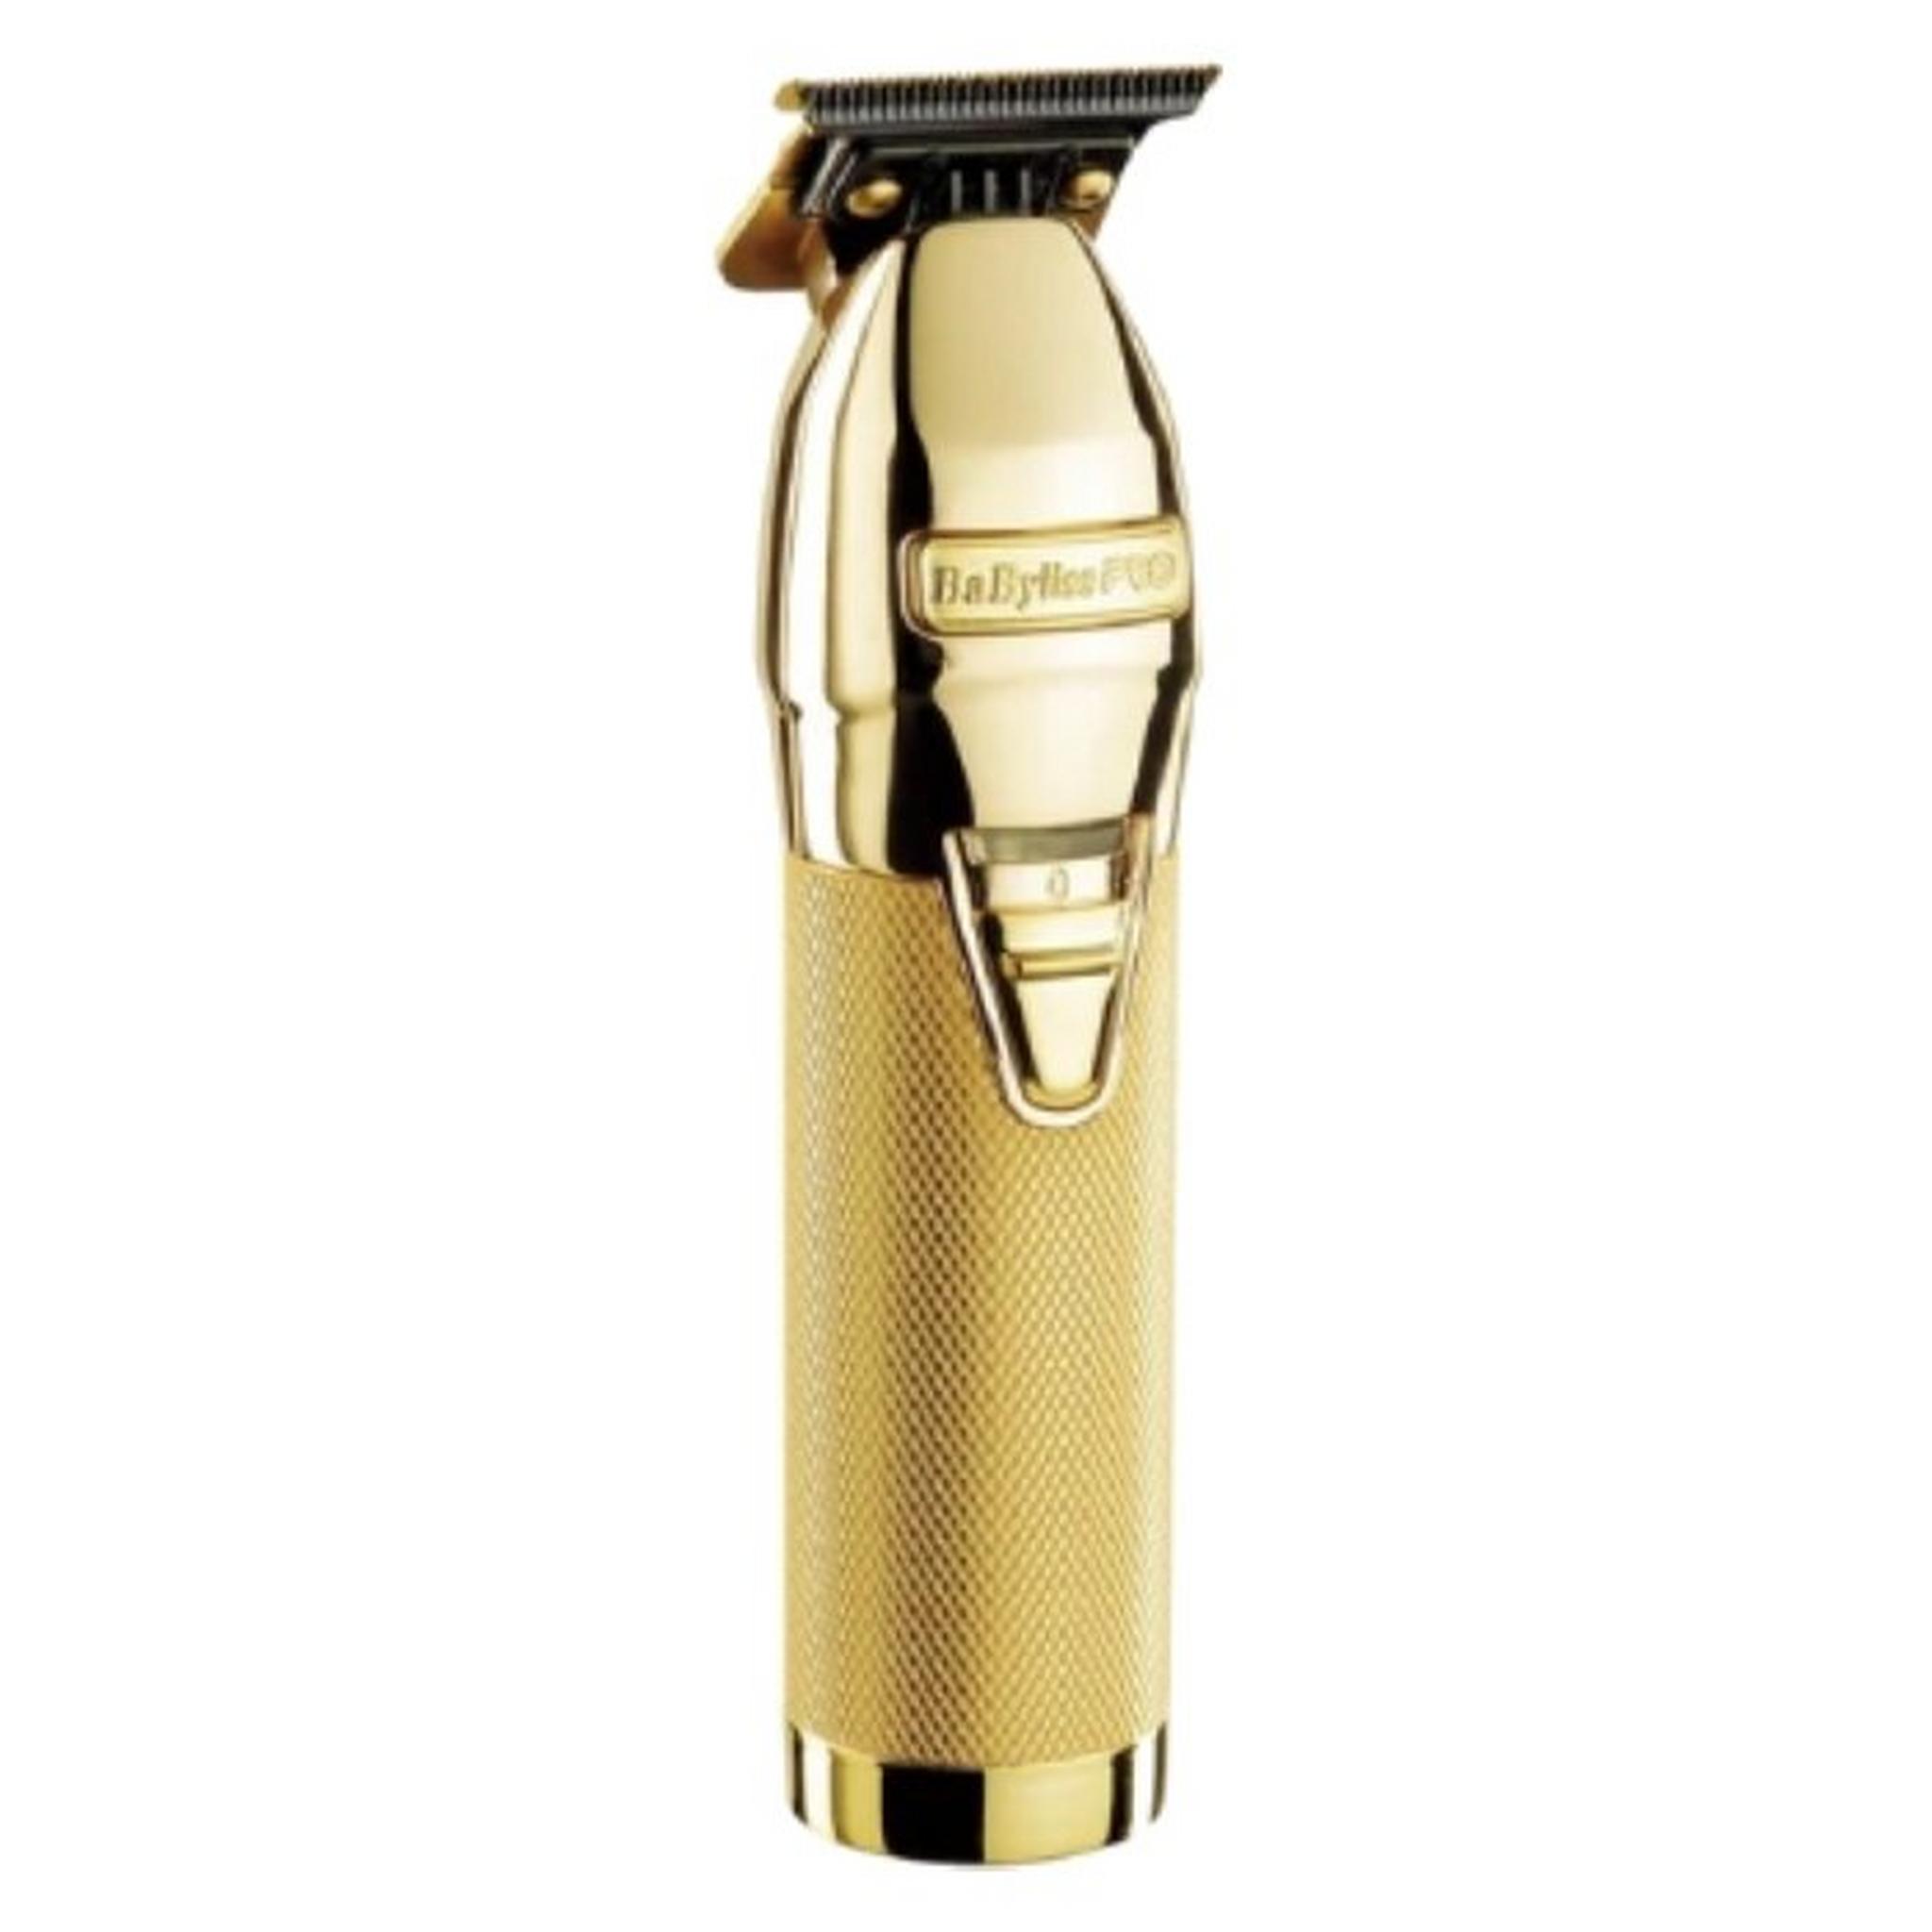 Babyliss Pro Gold Hair Clipper, FX7870GE - Gold